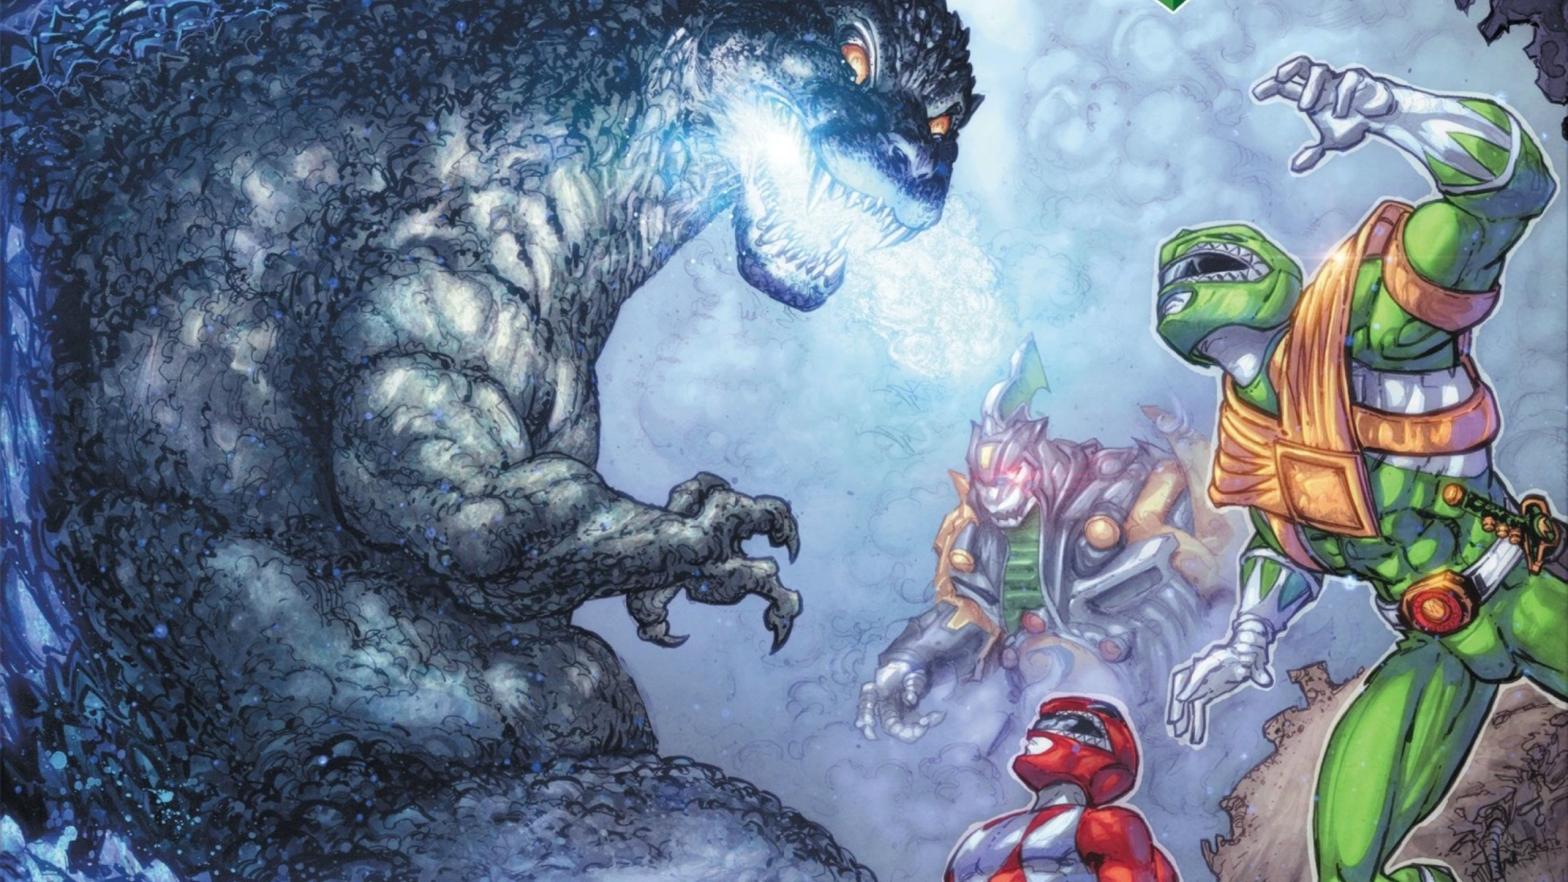 Partial cover art of Godzilla Vs. the Mighty Morphin Power Rangers #1 by Freddie Williams II. (Image: IDW/Boom Studios/Toho)